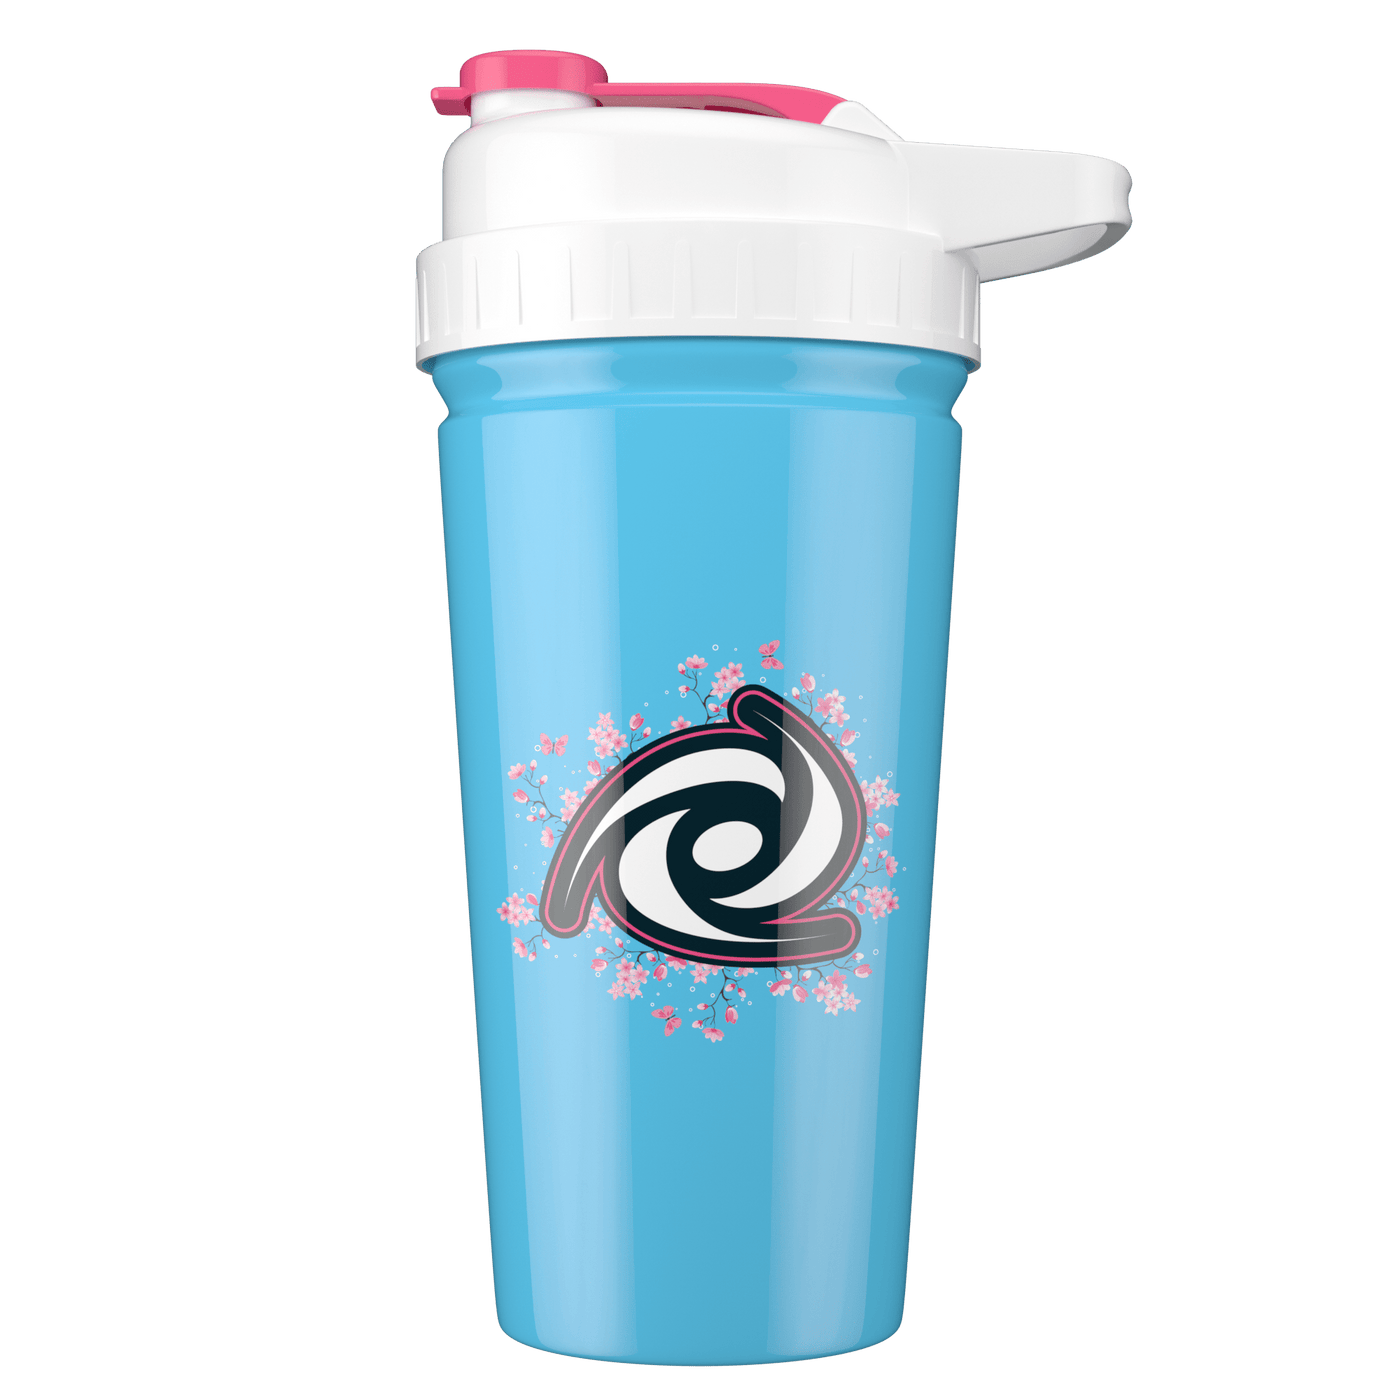 G FUEL| Cherry Blossom Stainless Steel Shaker Shaker Cup 